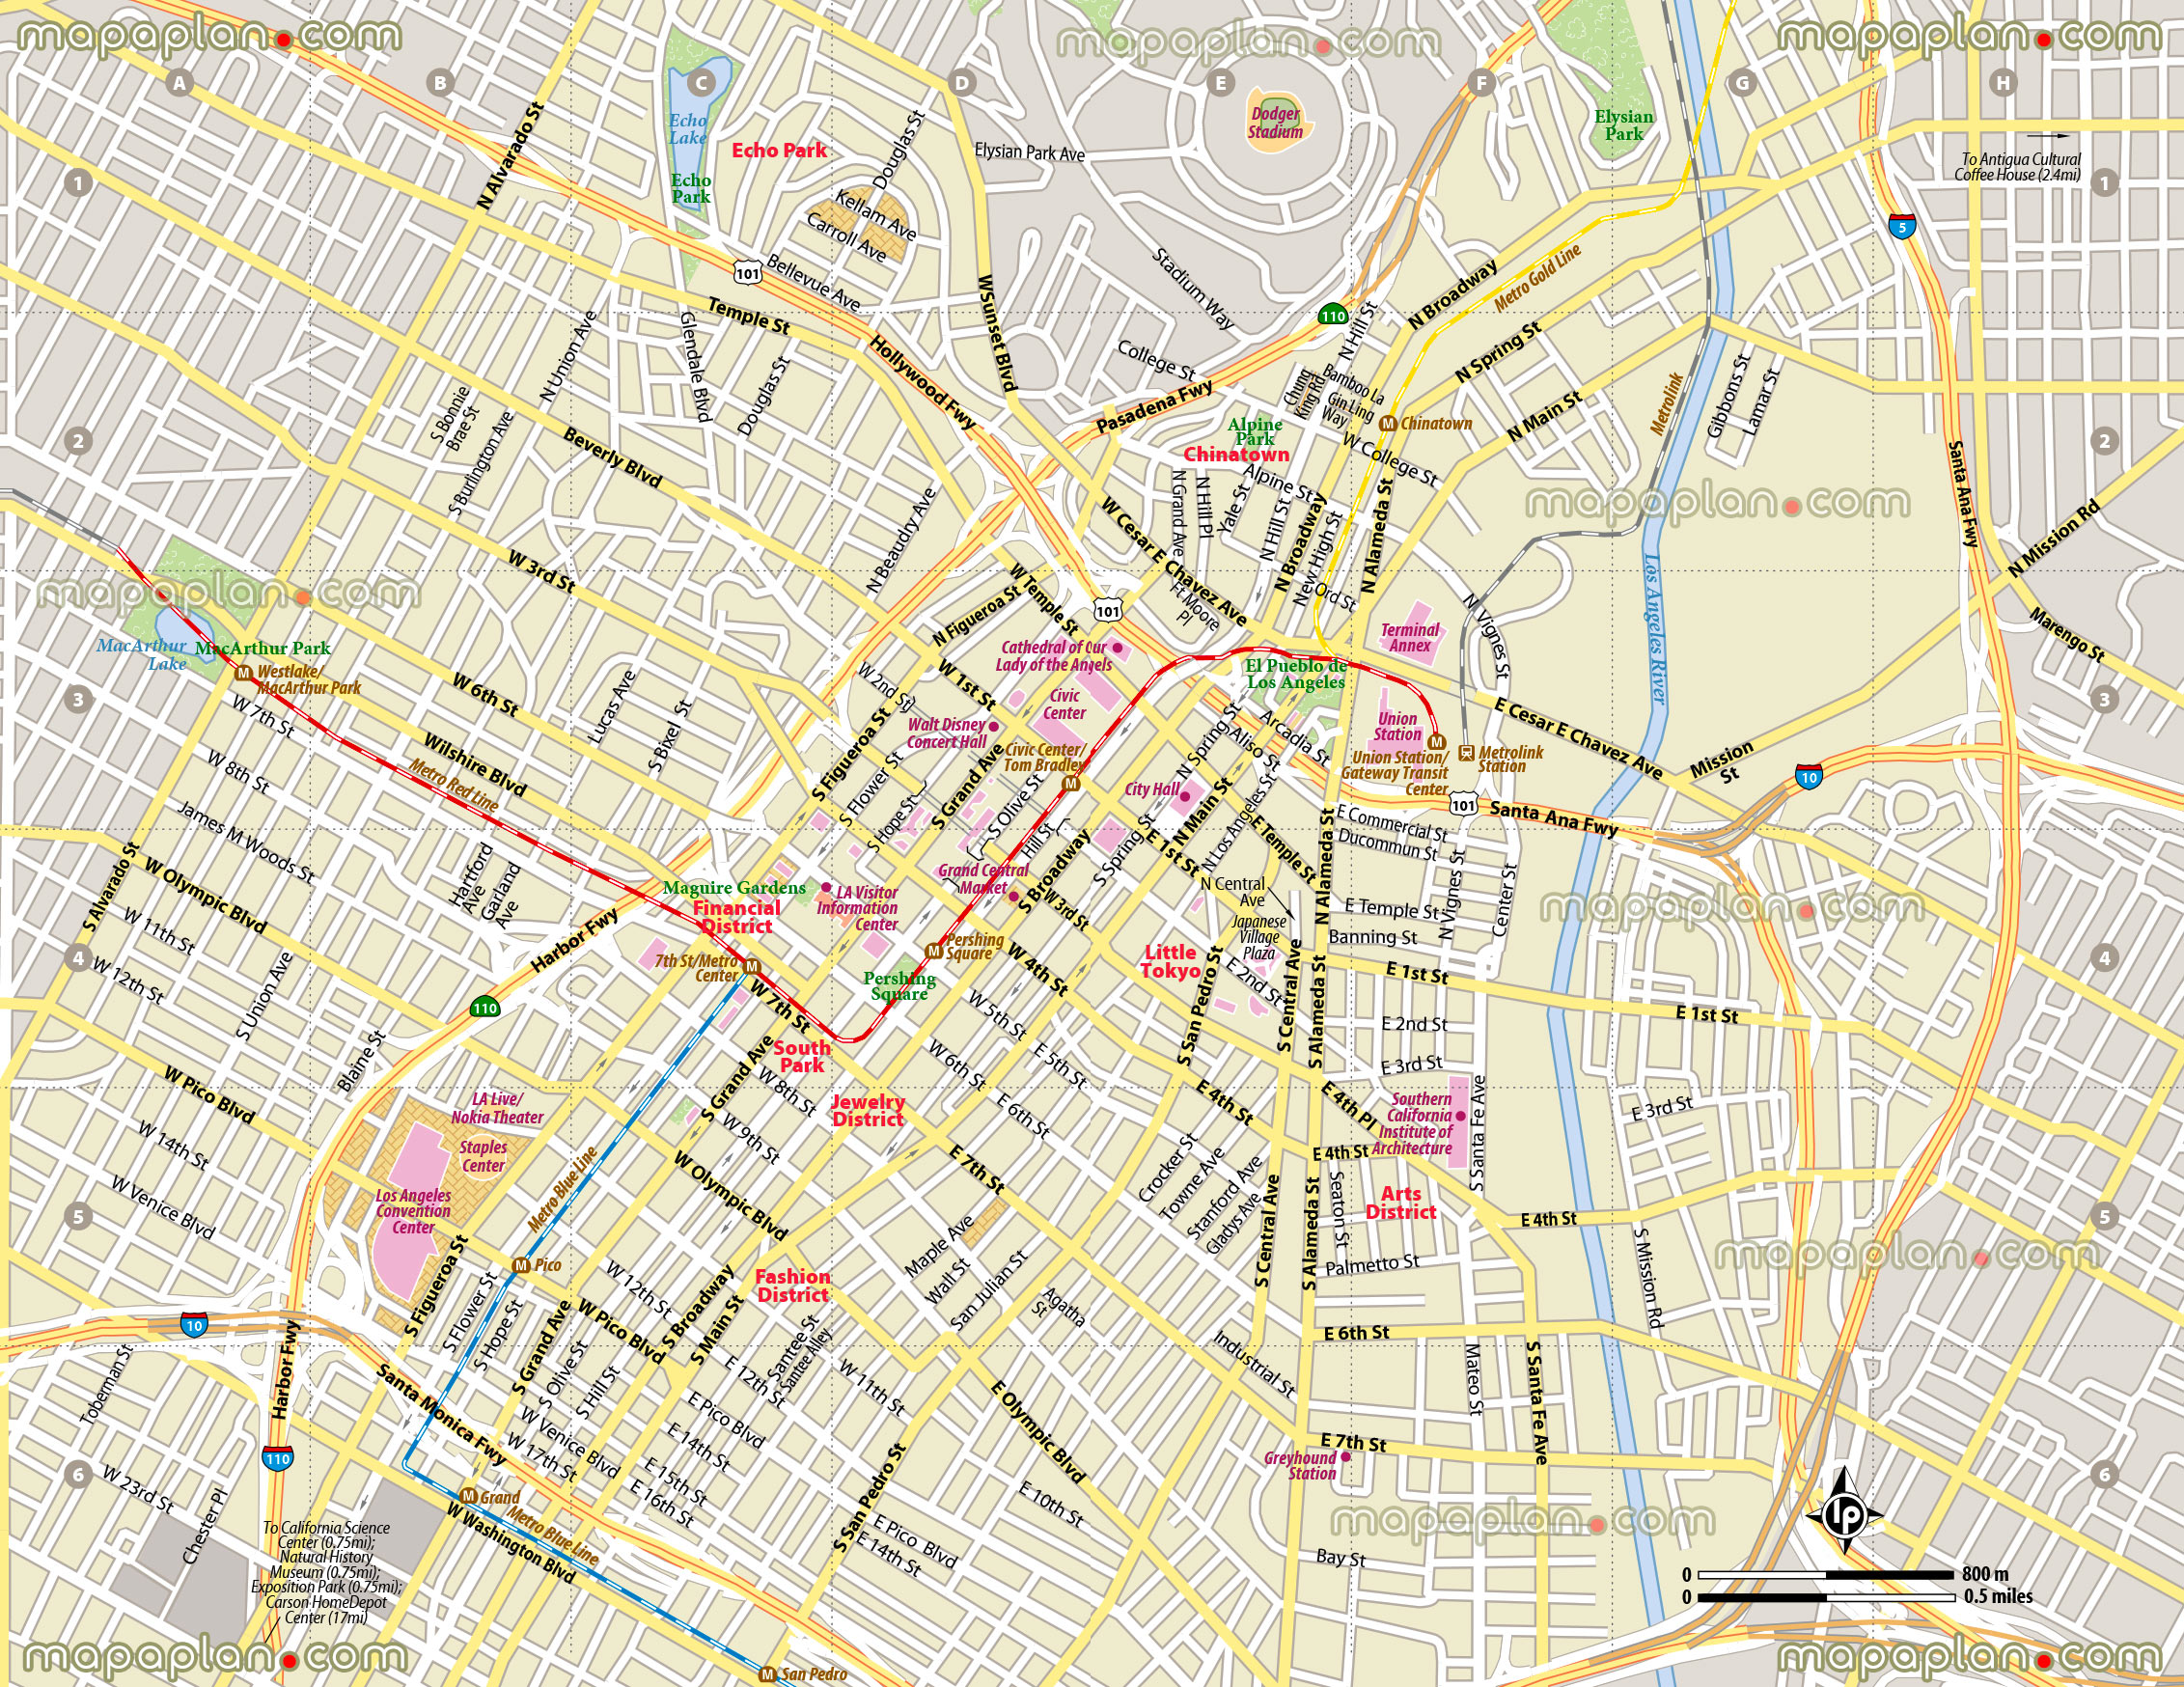 Los Angeles Map Downtown District Travel Guide Plan Showing